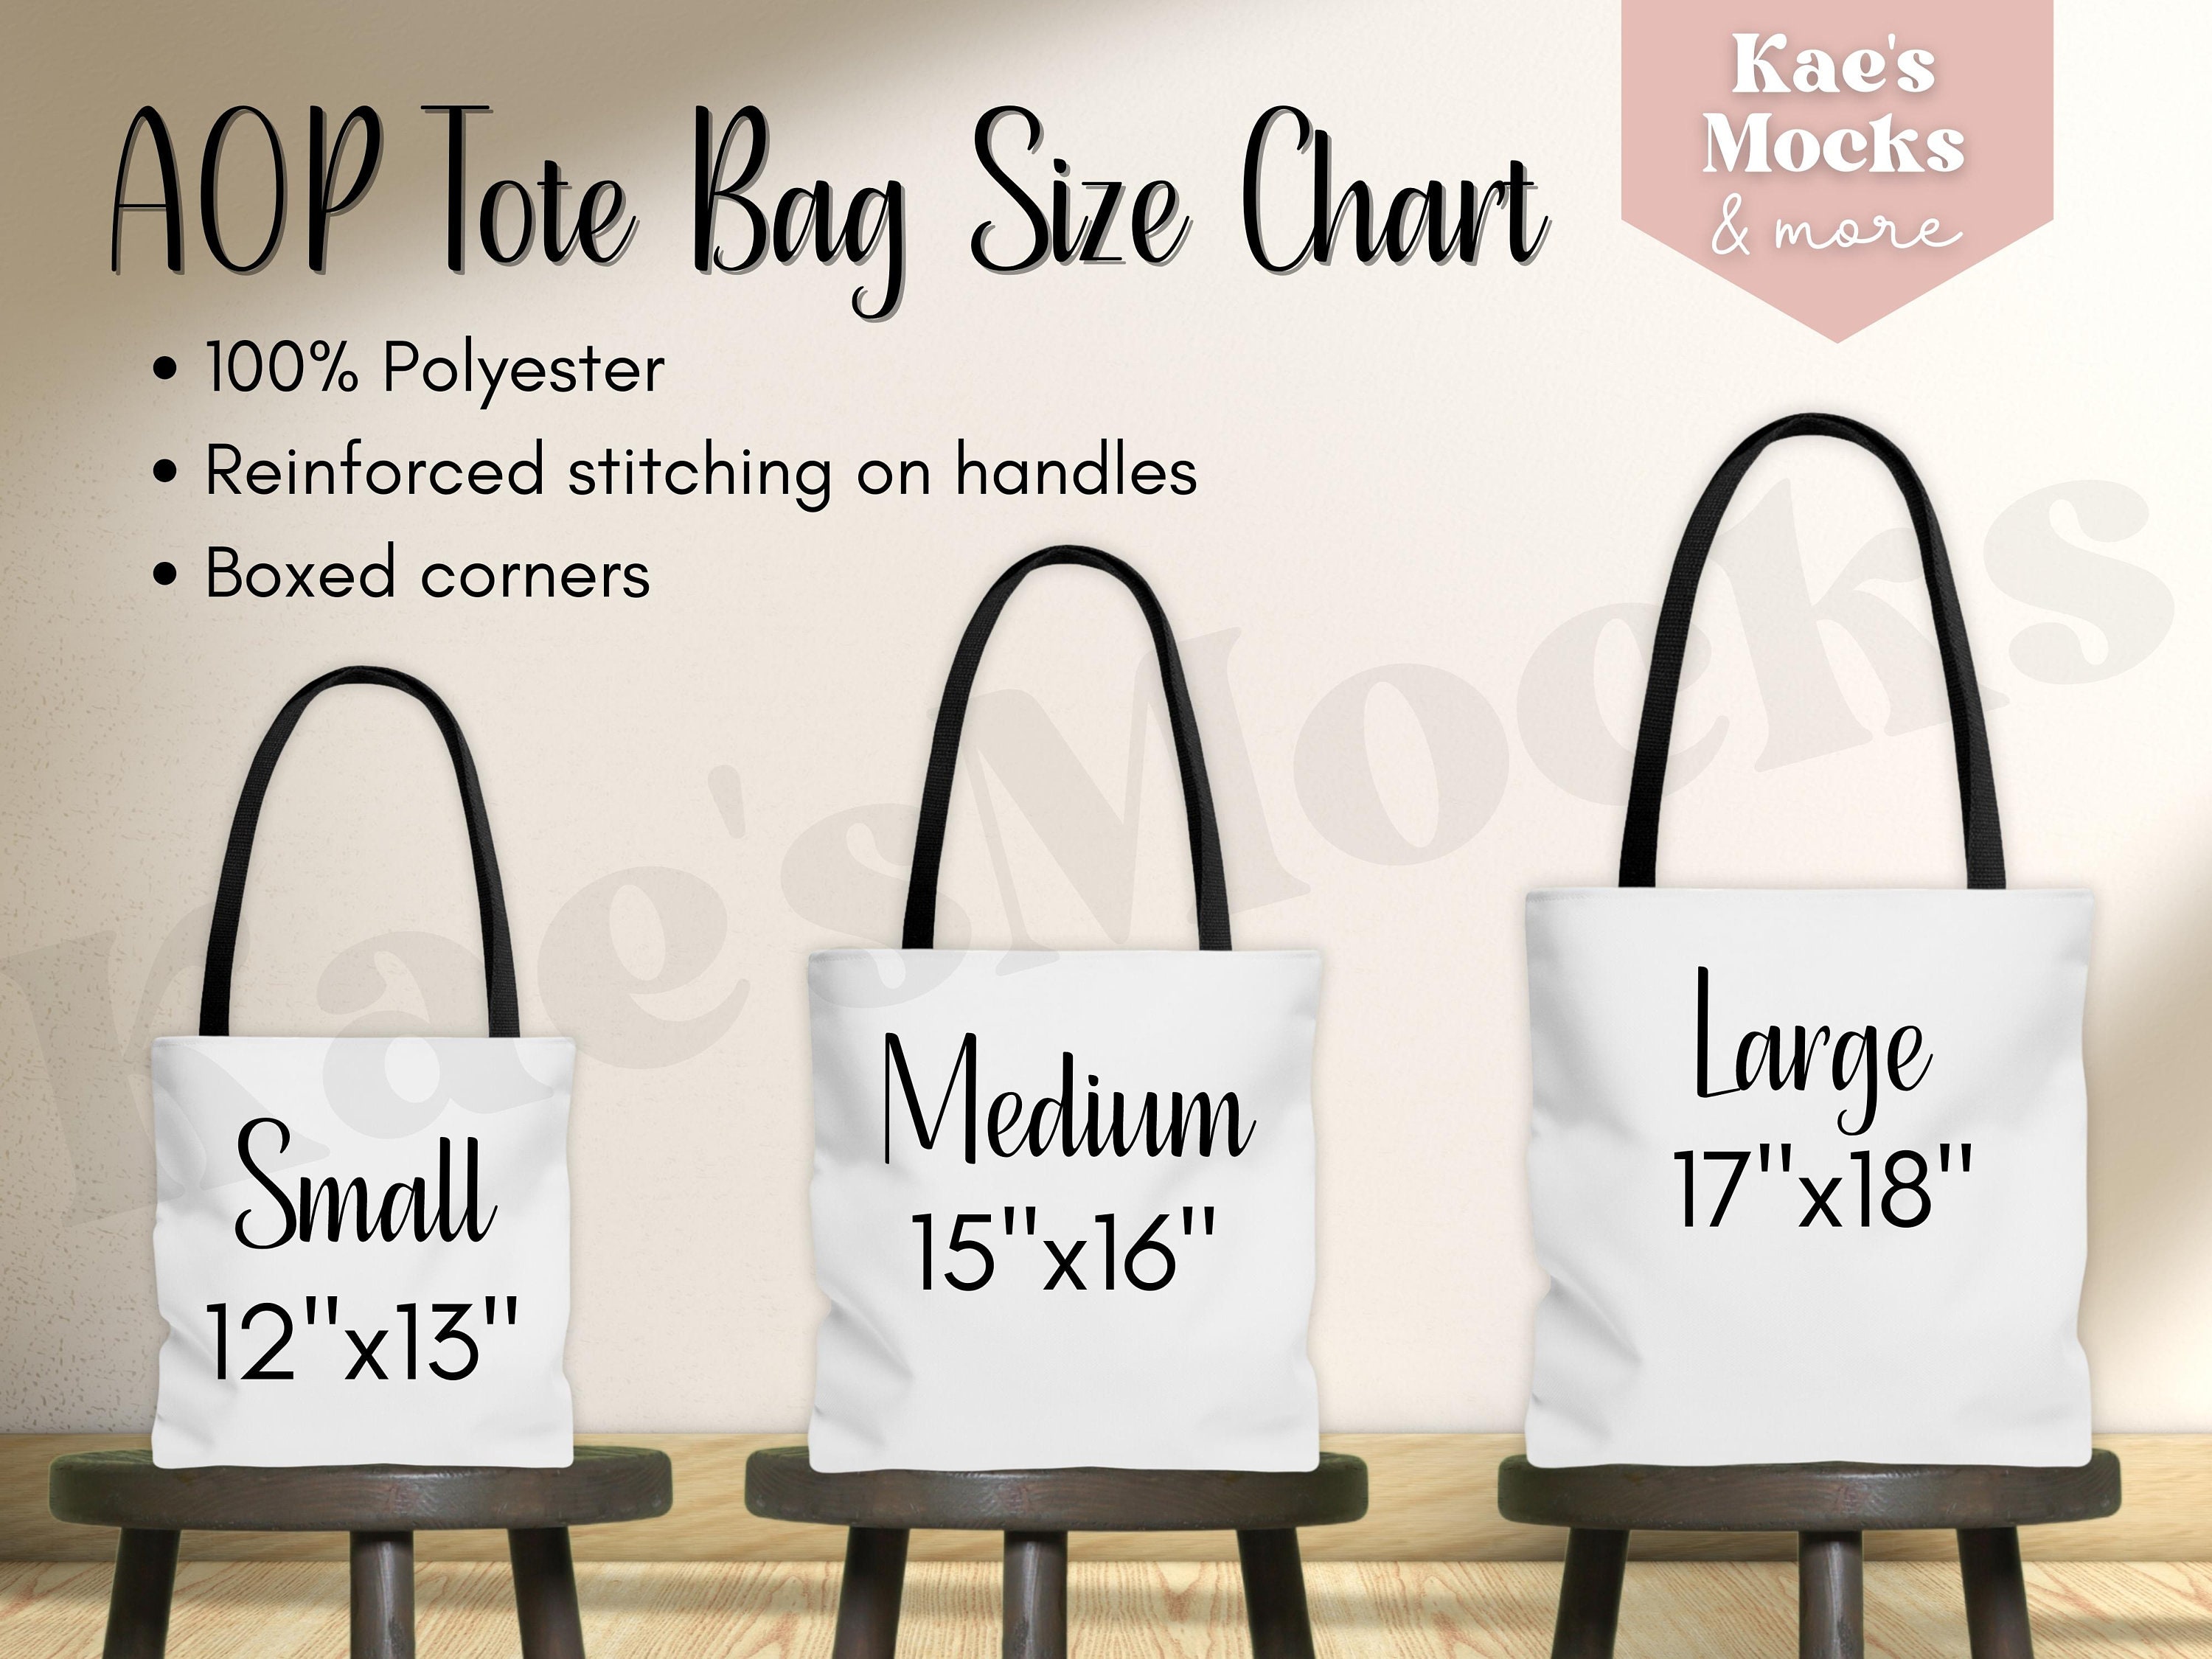 Tote Bag Size Chart, AOP Tote Size Chart, Sizing Chart for Tote